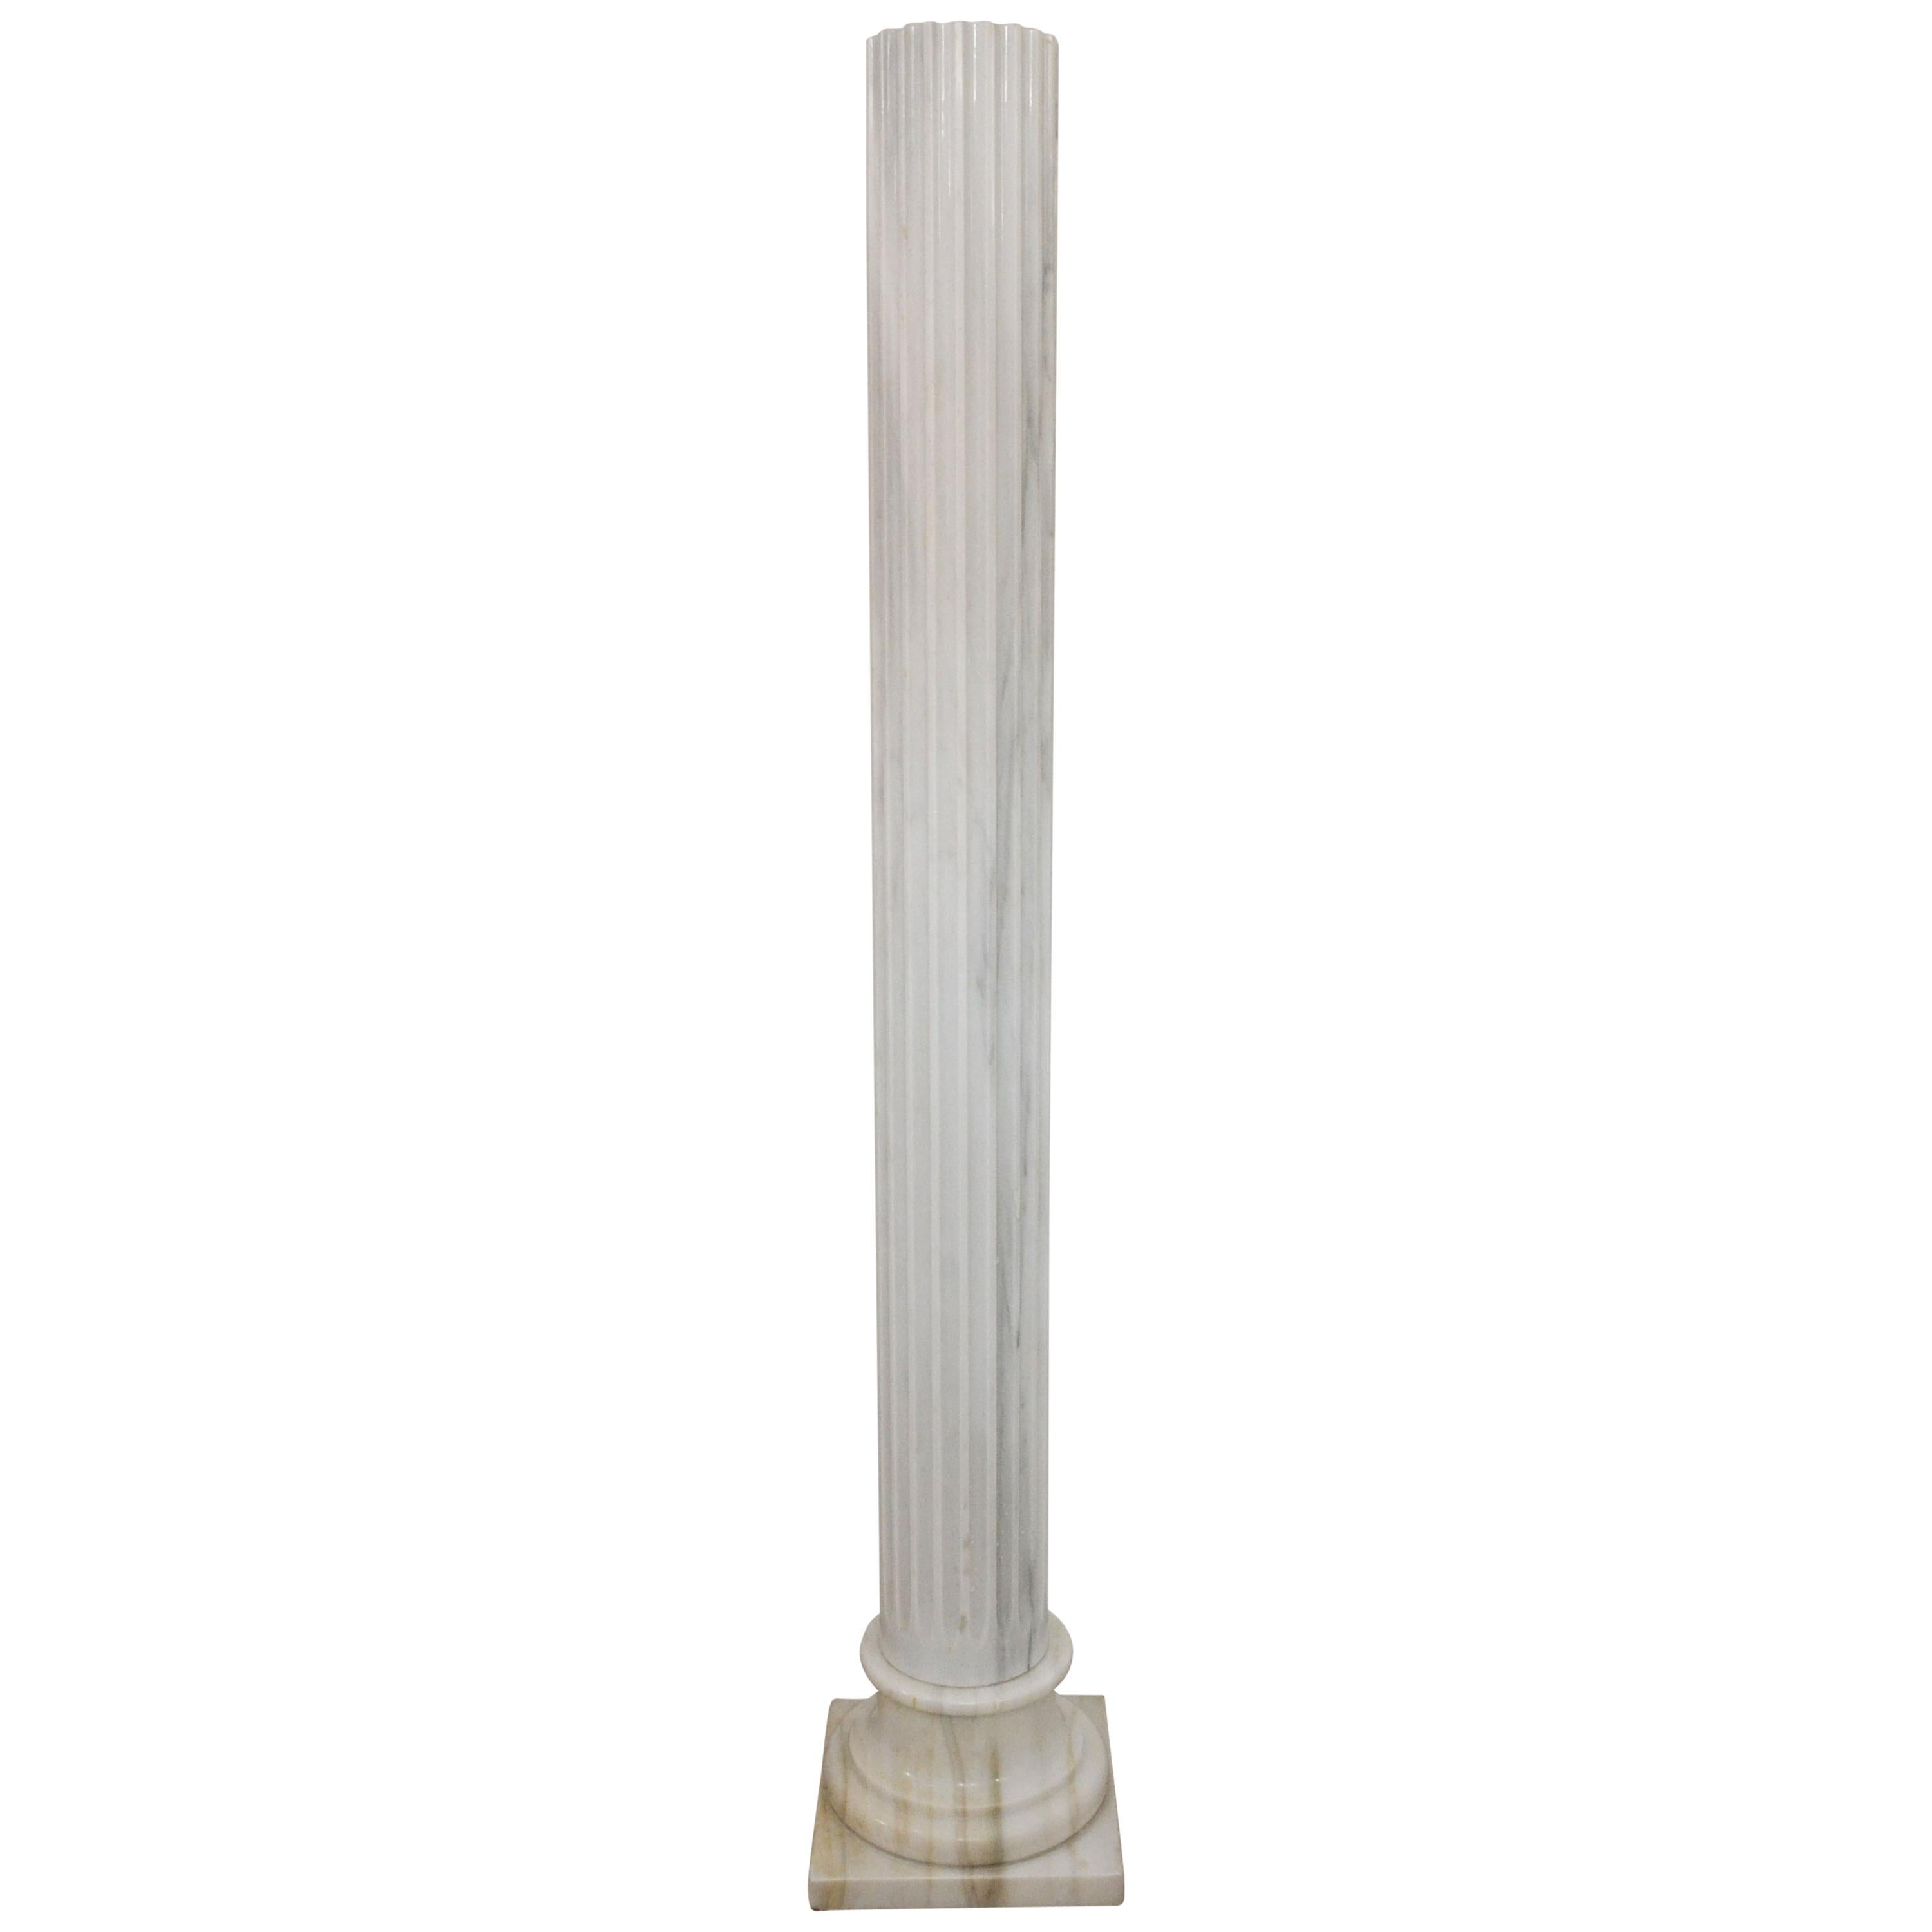 'ATHENA' Large Column / Pillar White Carrara Marble by Element & Co. For Sale